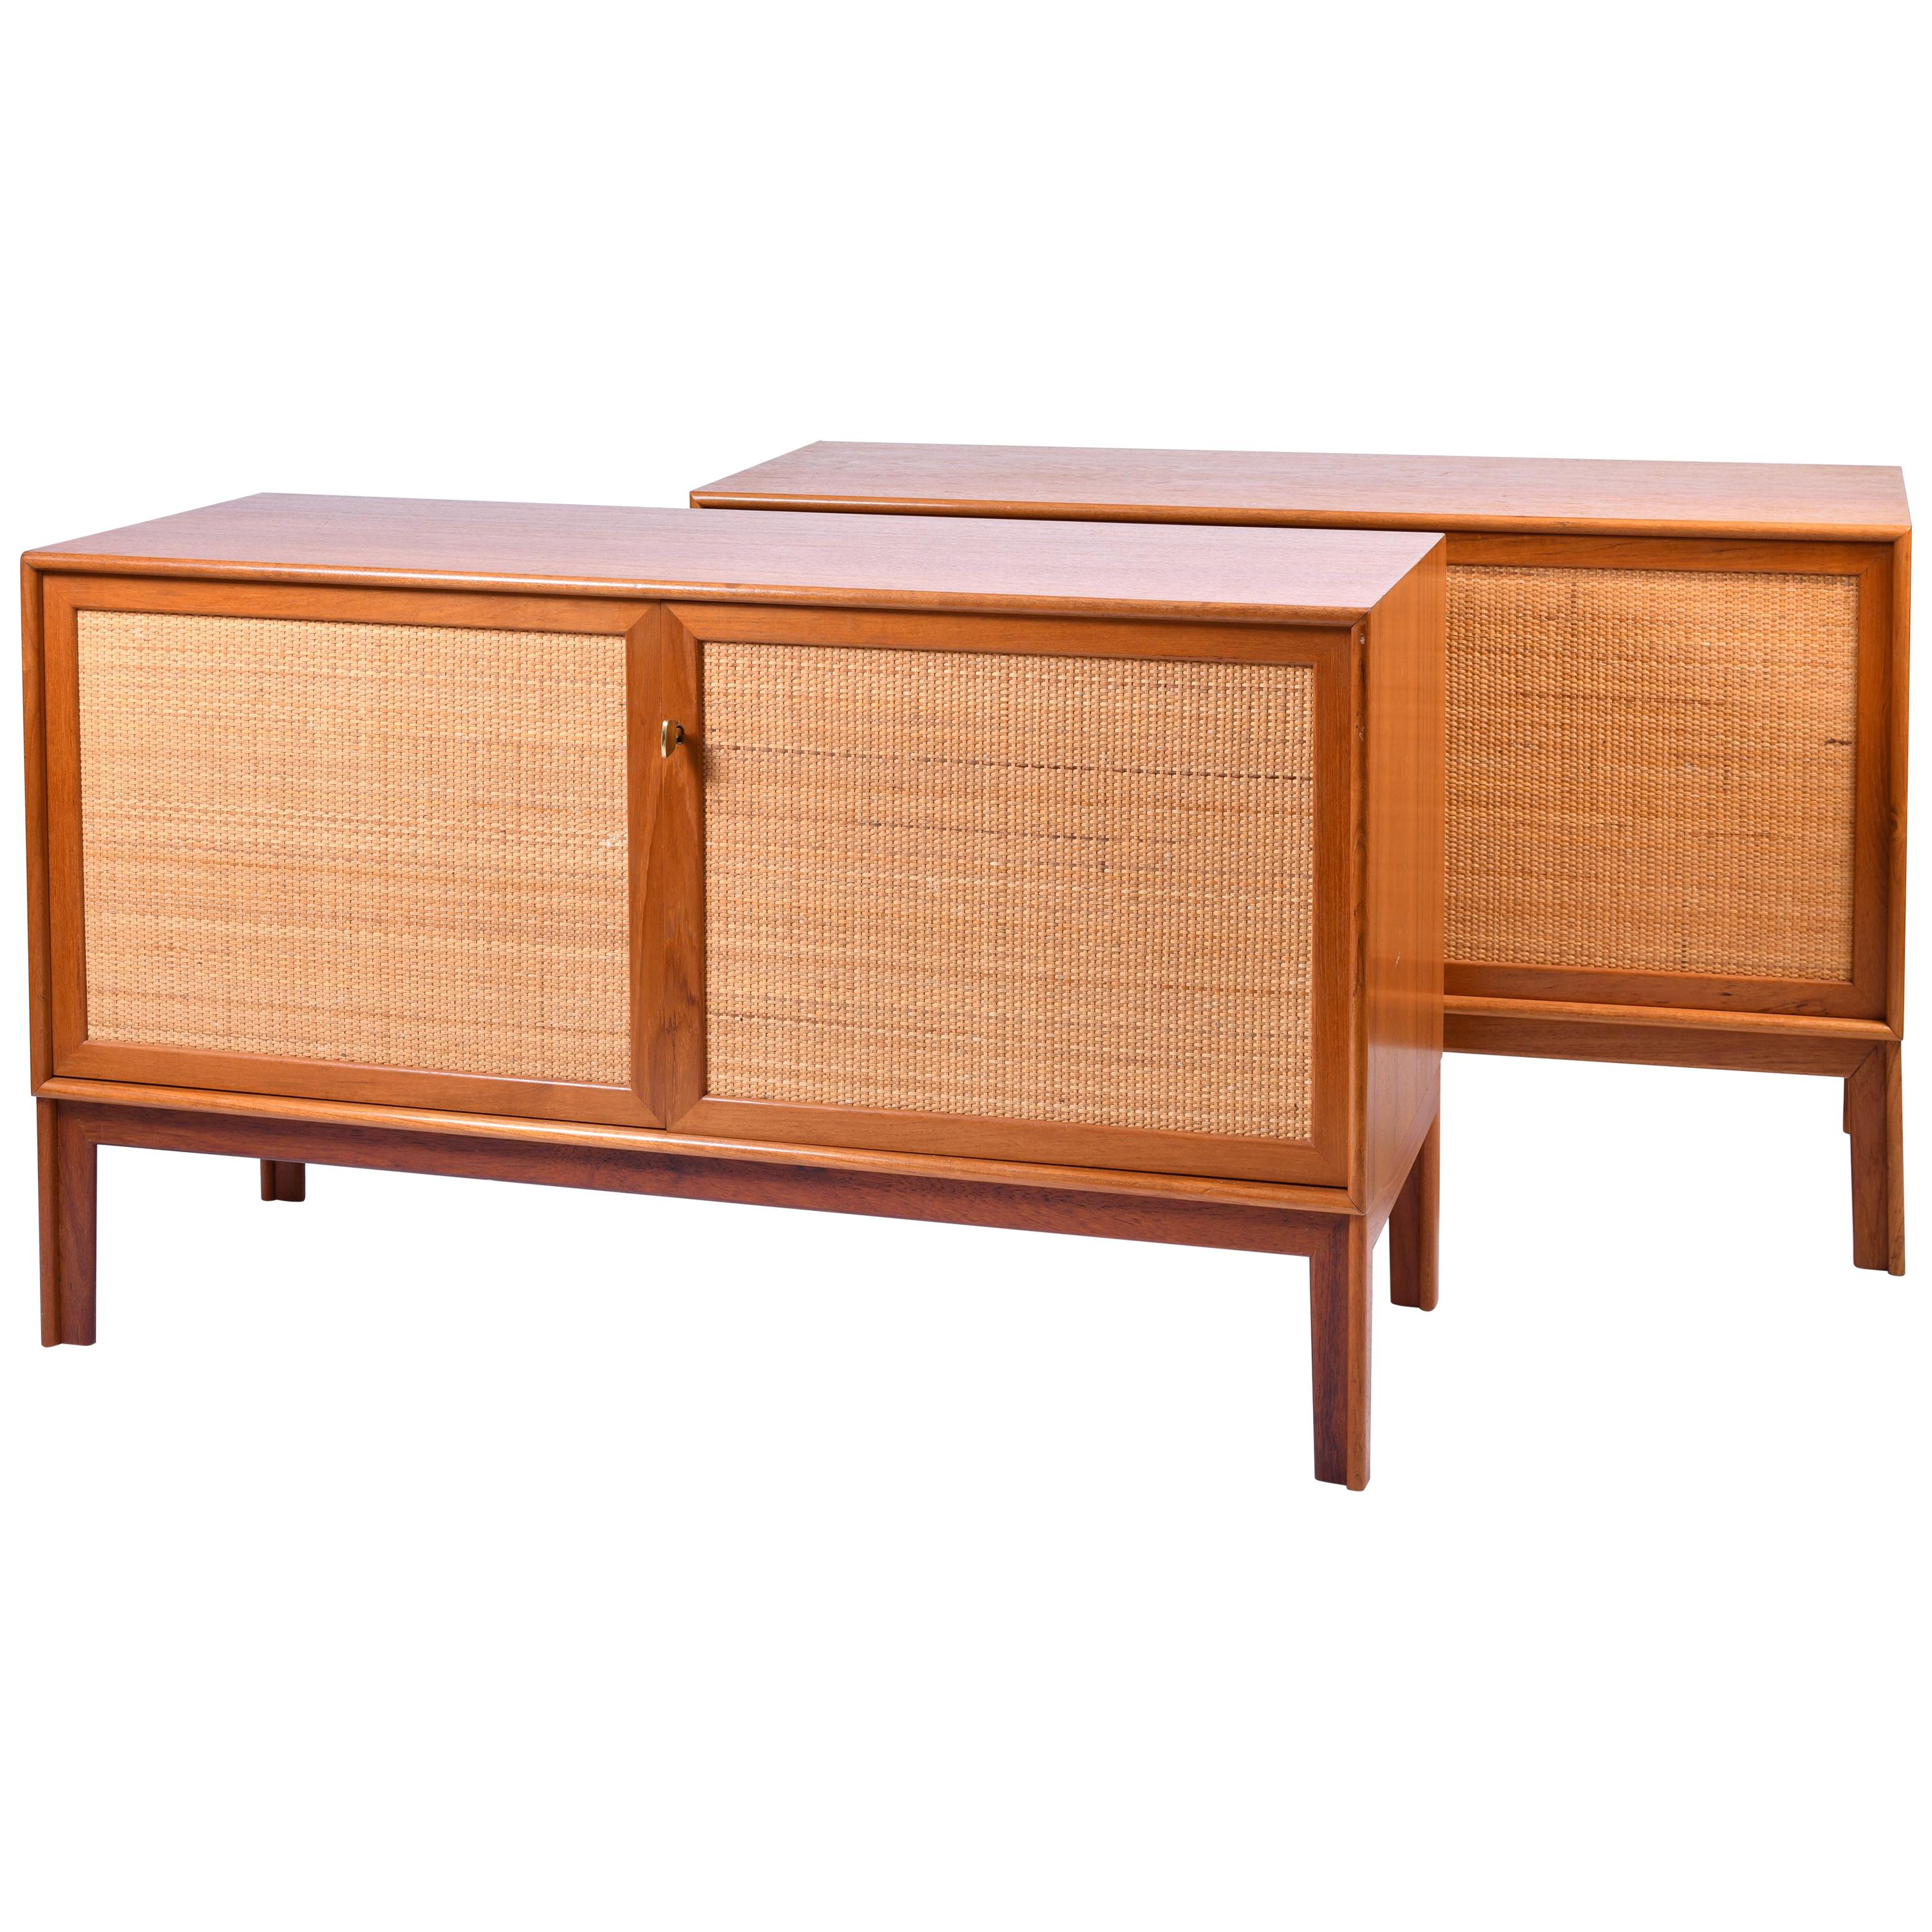 Pair of Oak and Rattan Sideboards by Alf Svensson